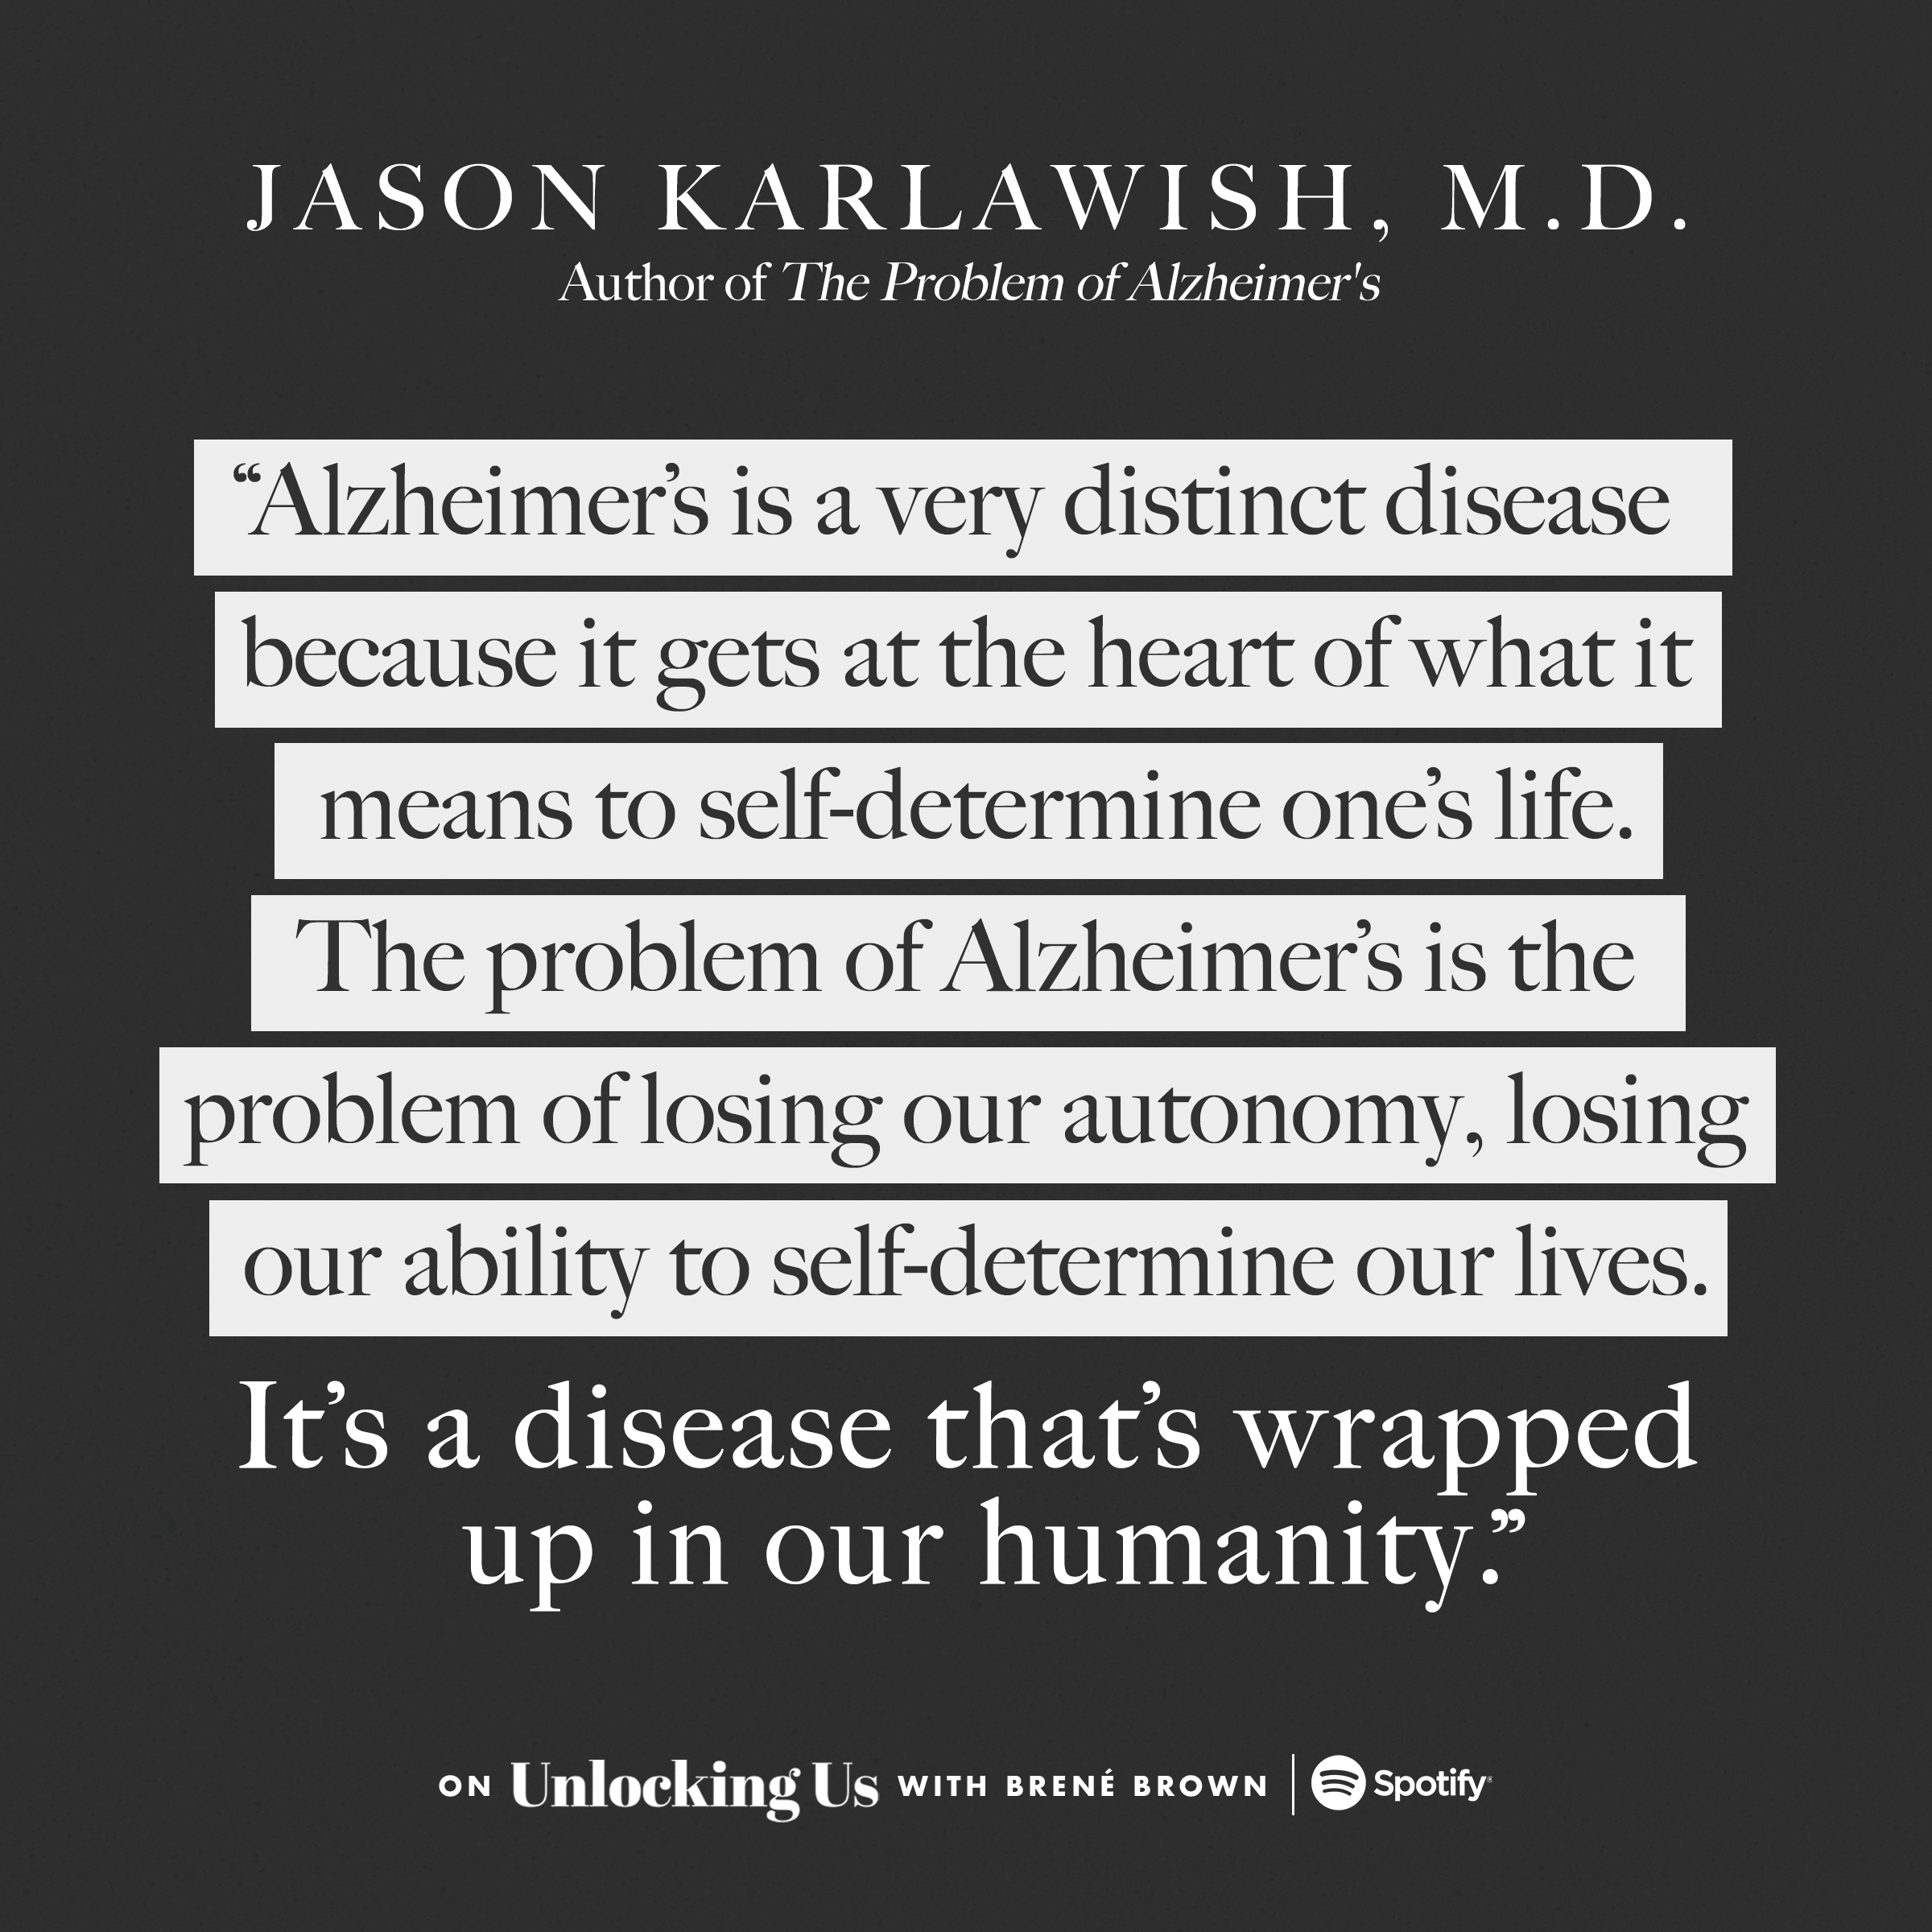 Alzheimer's is a very distinct disease because it gets at the heart of what it means to self-determine one's life. The problem of Alzheimer's is the problem of losing our autonomy, losing our ability to self-determine our lives. It's a disease that's wrapped up in our humanity. -by Jason Karlawish, MD